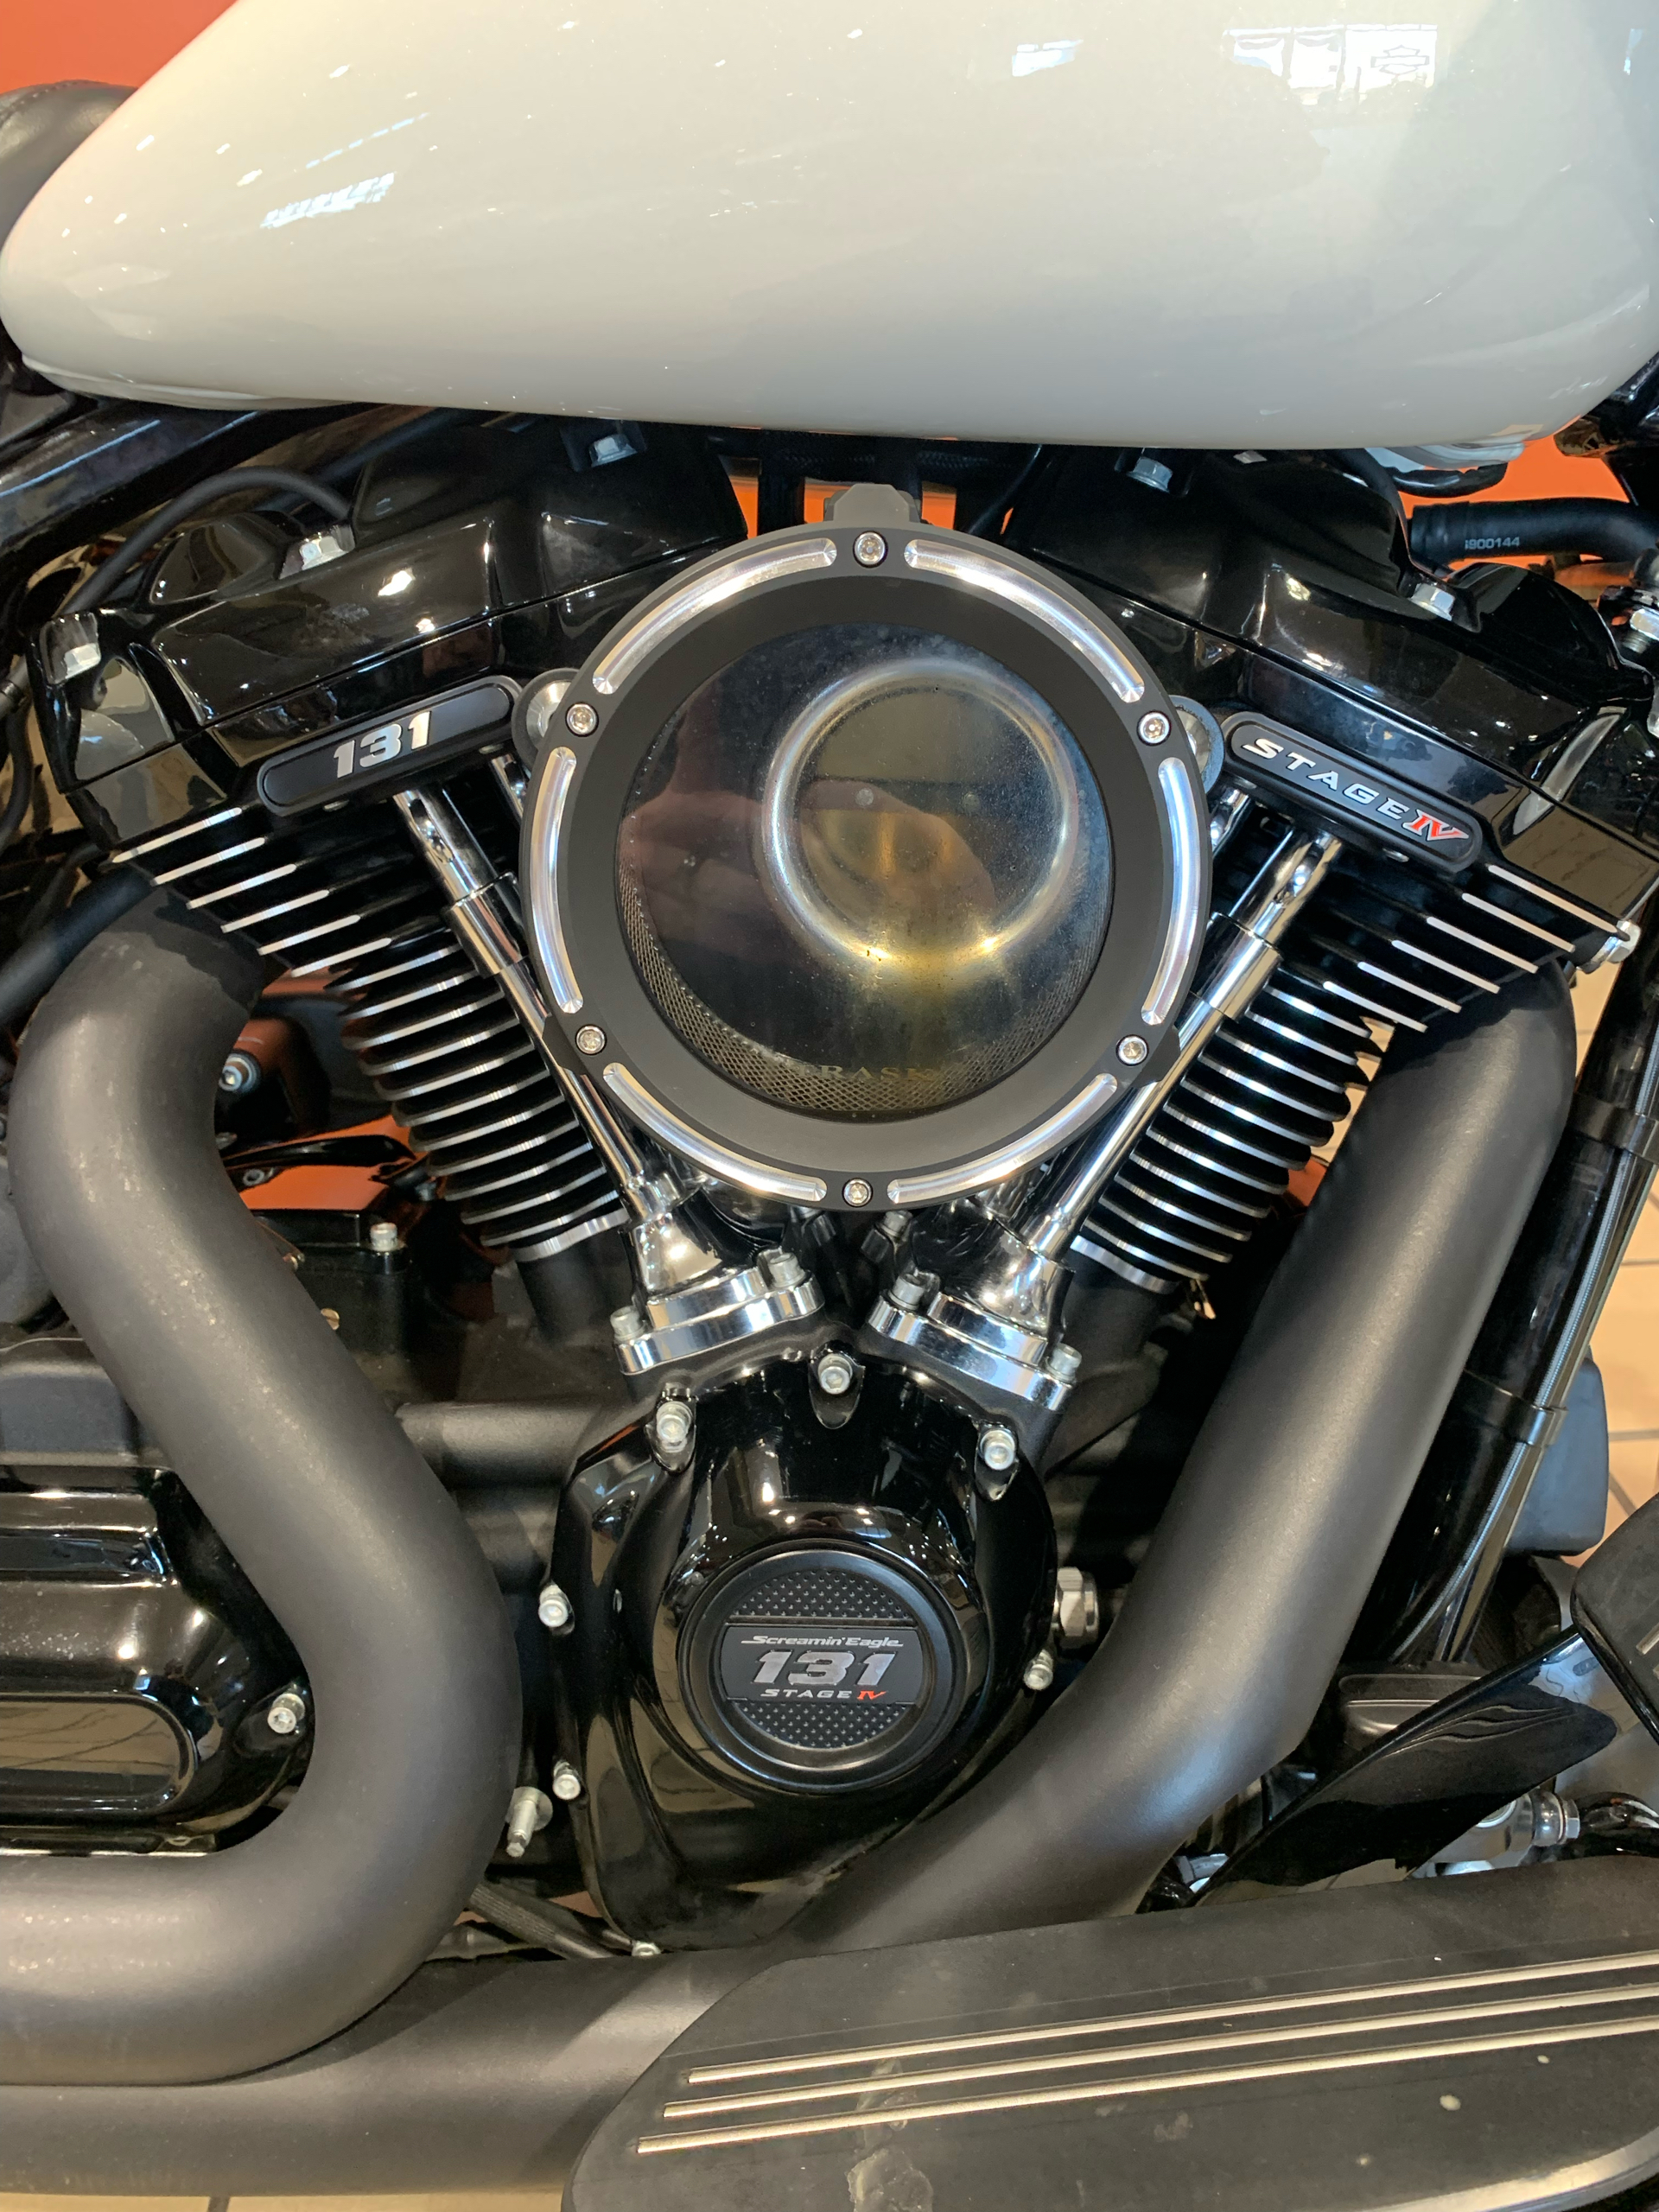 2018 Harley-Davidson ROAD GLIDE SPECIAL in Dumfries, Virginia - Photo 2